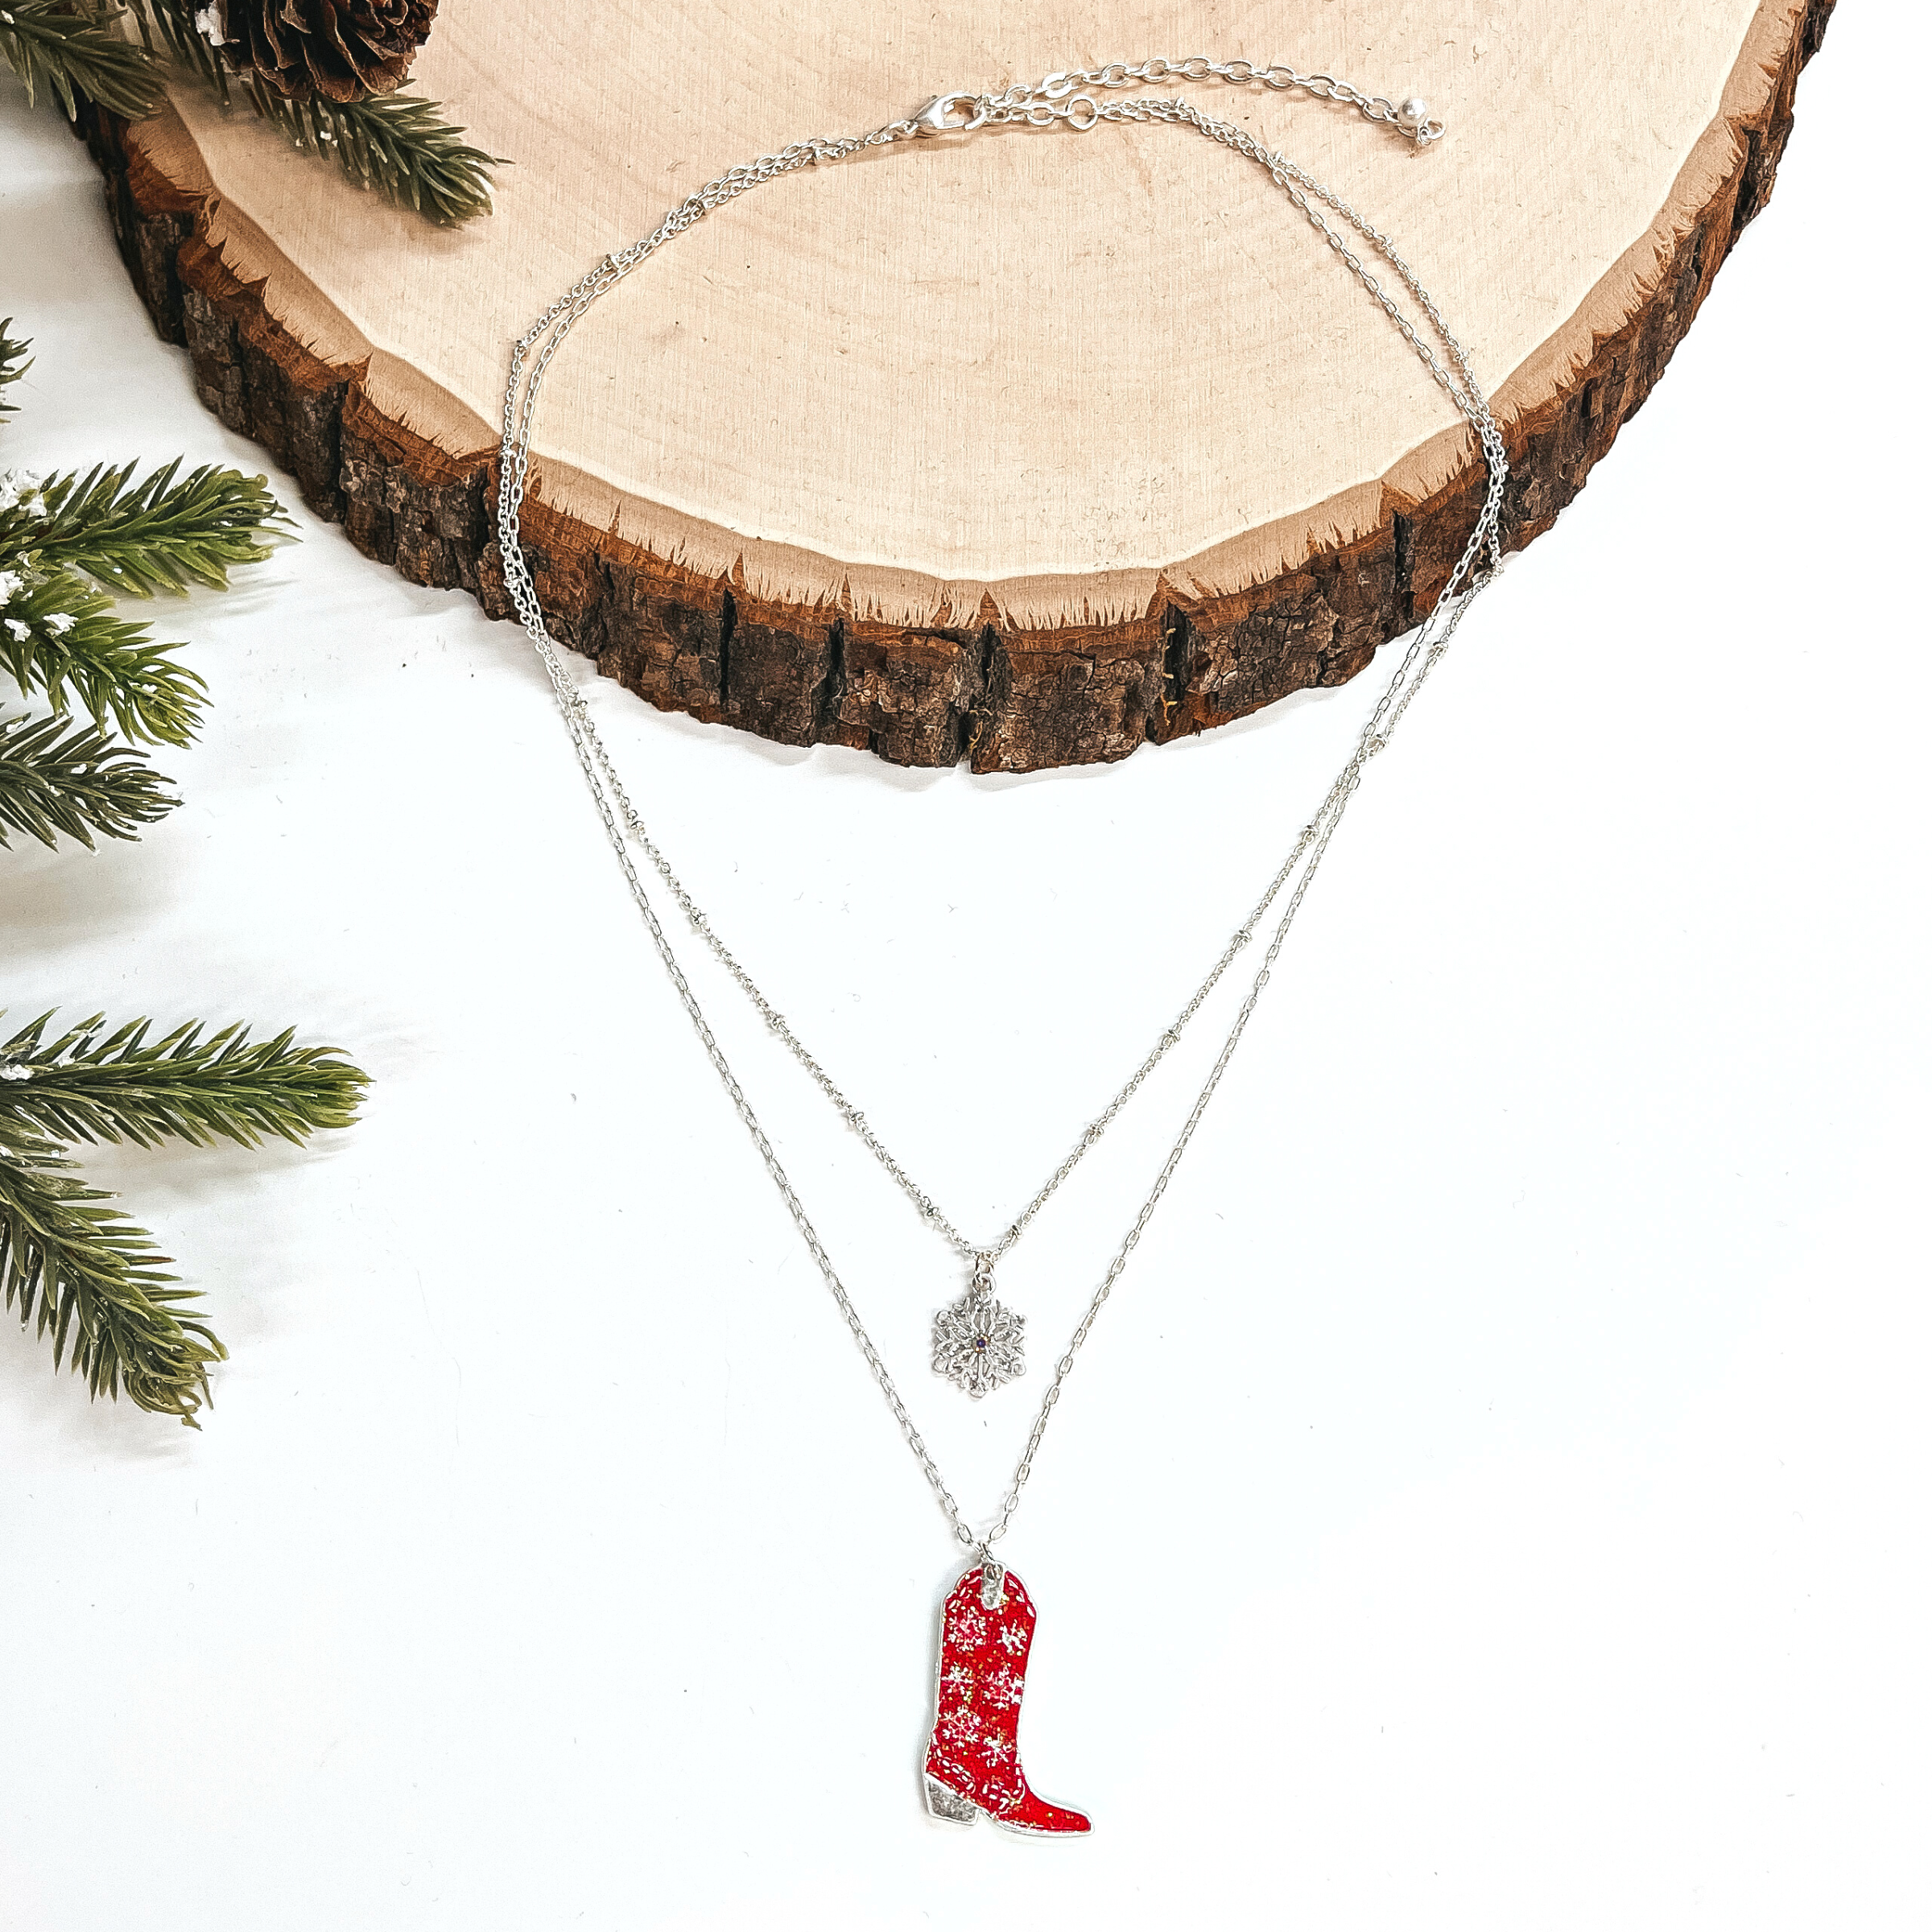 This is a double strand silver necklace with two hanging pendants.  The smaller strand has a silver snowflake charm and the longer strand has a  red glitter boot pendant. The boot pendant has a silver snowflake pattern  and the boot pendant is in a silver setting. This necklace is laying on a  white background and a slab of wood, with a pine cone tree in the side as decor.